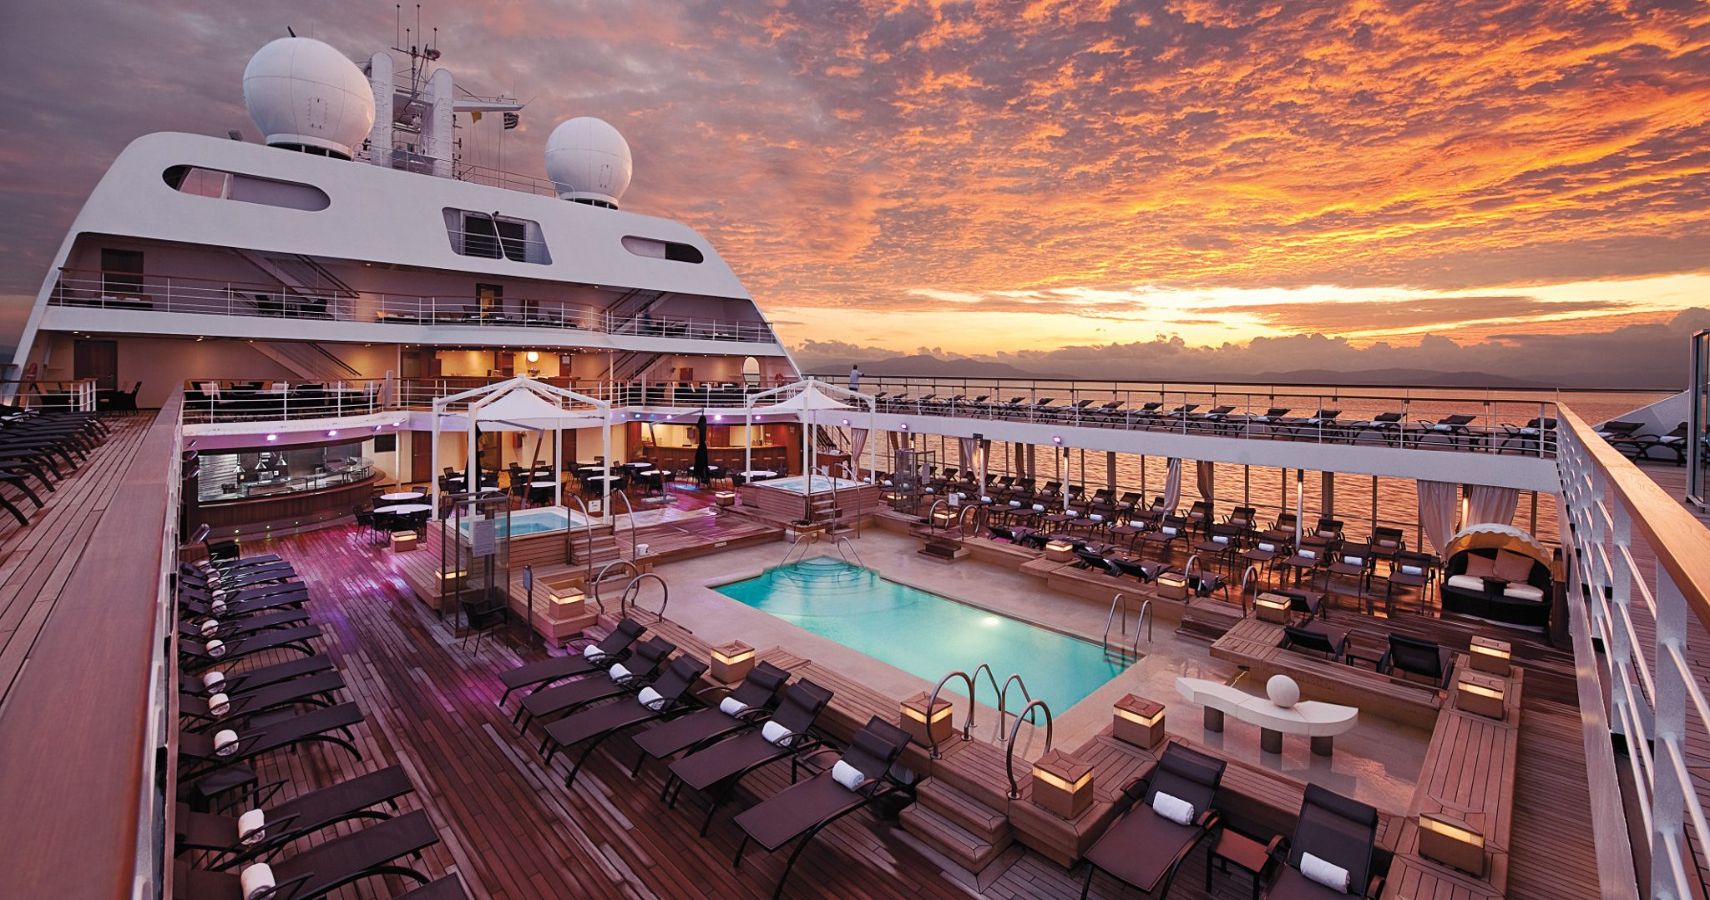 10 best cruise lines